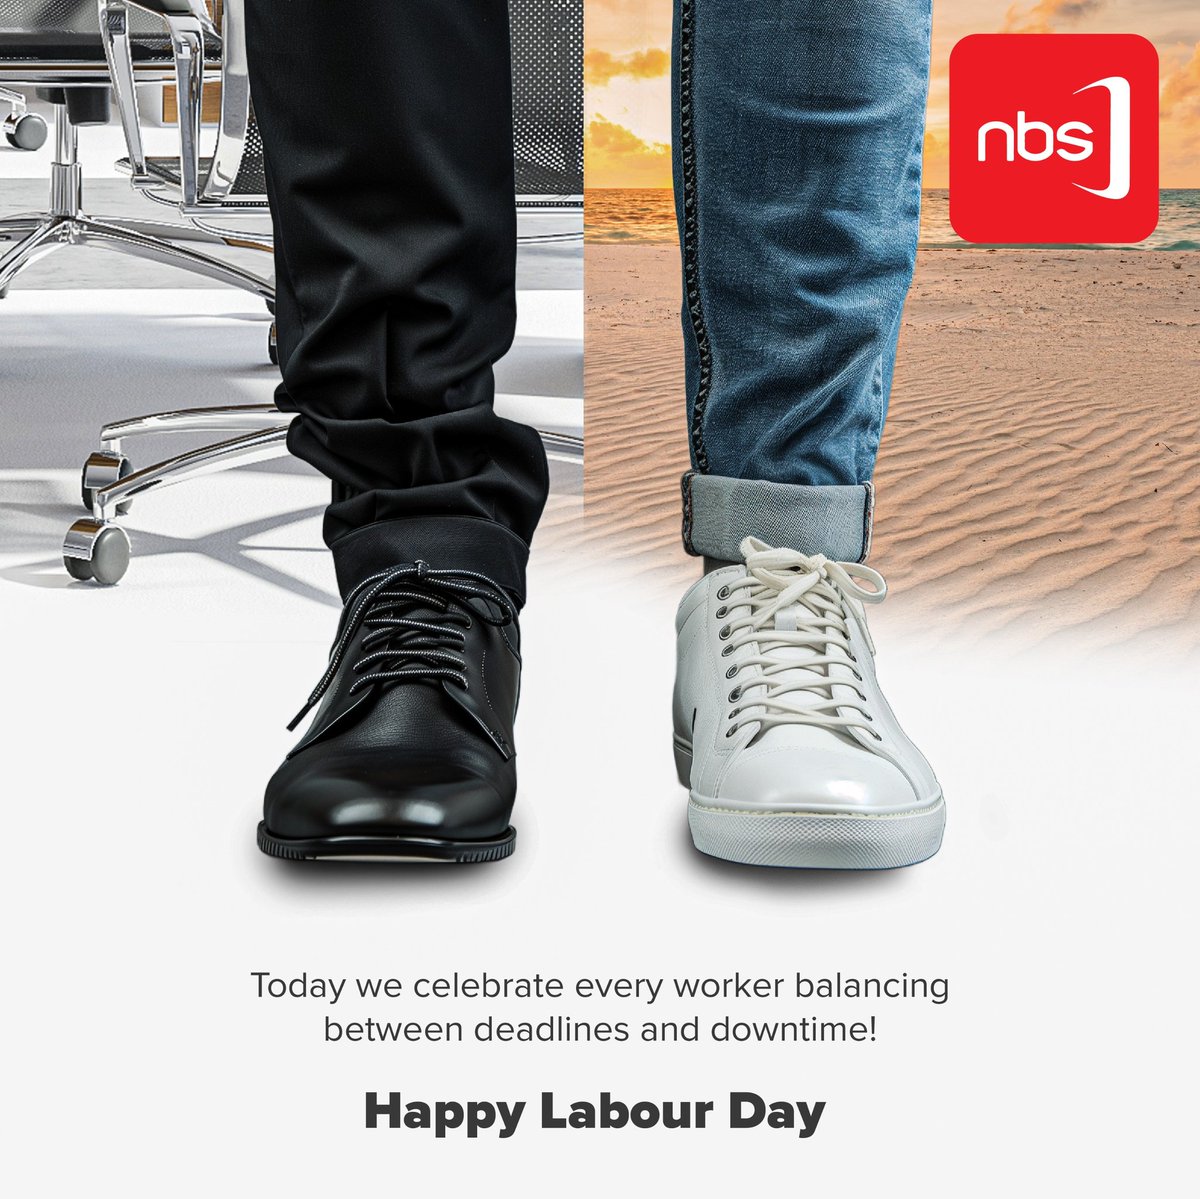 Happy labor day to you all..... @nbstv